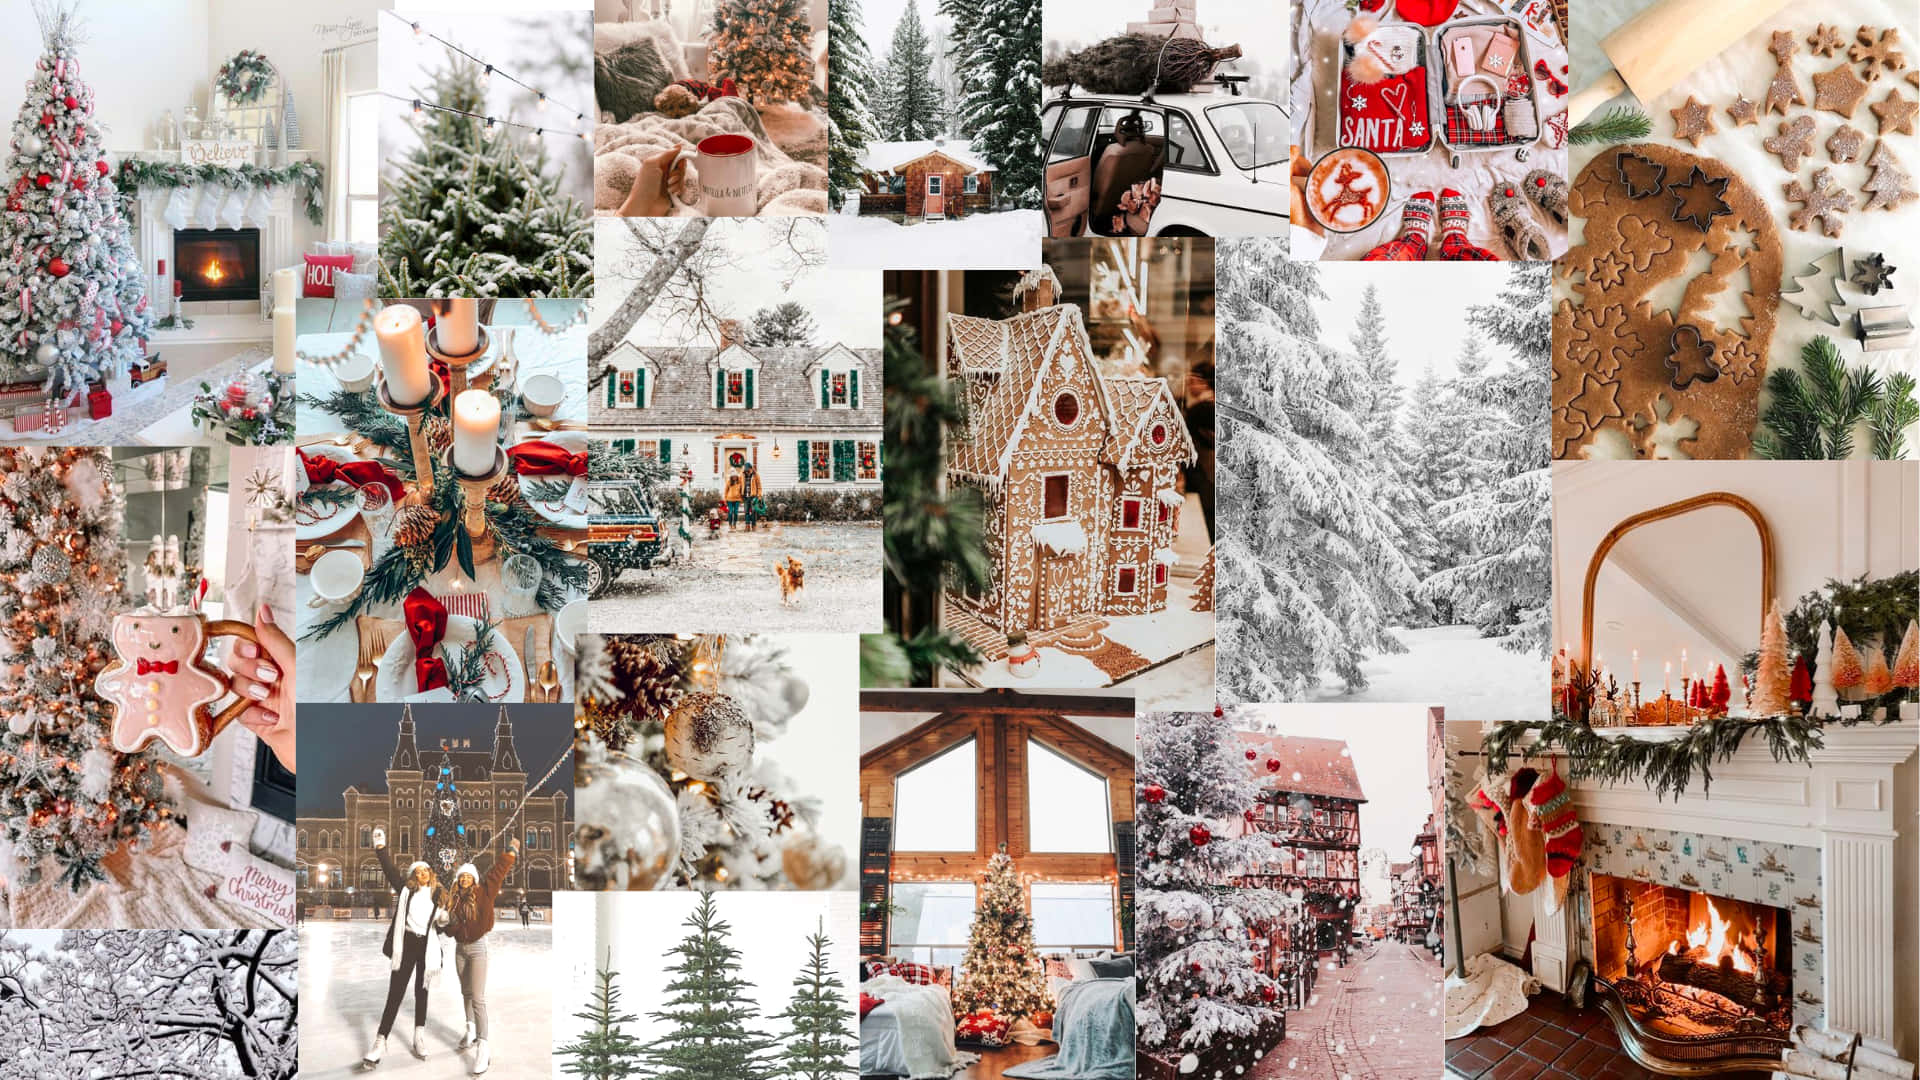 Download Christmas Collage With Christmas Trees And Decorations ...